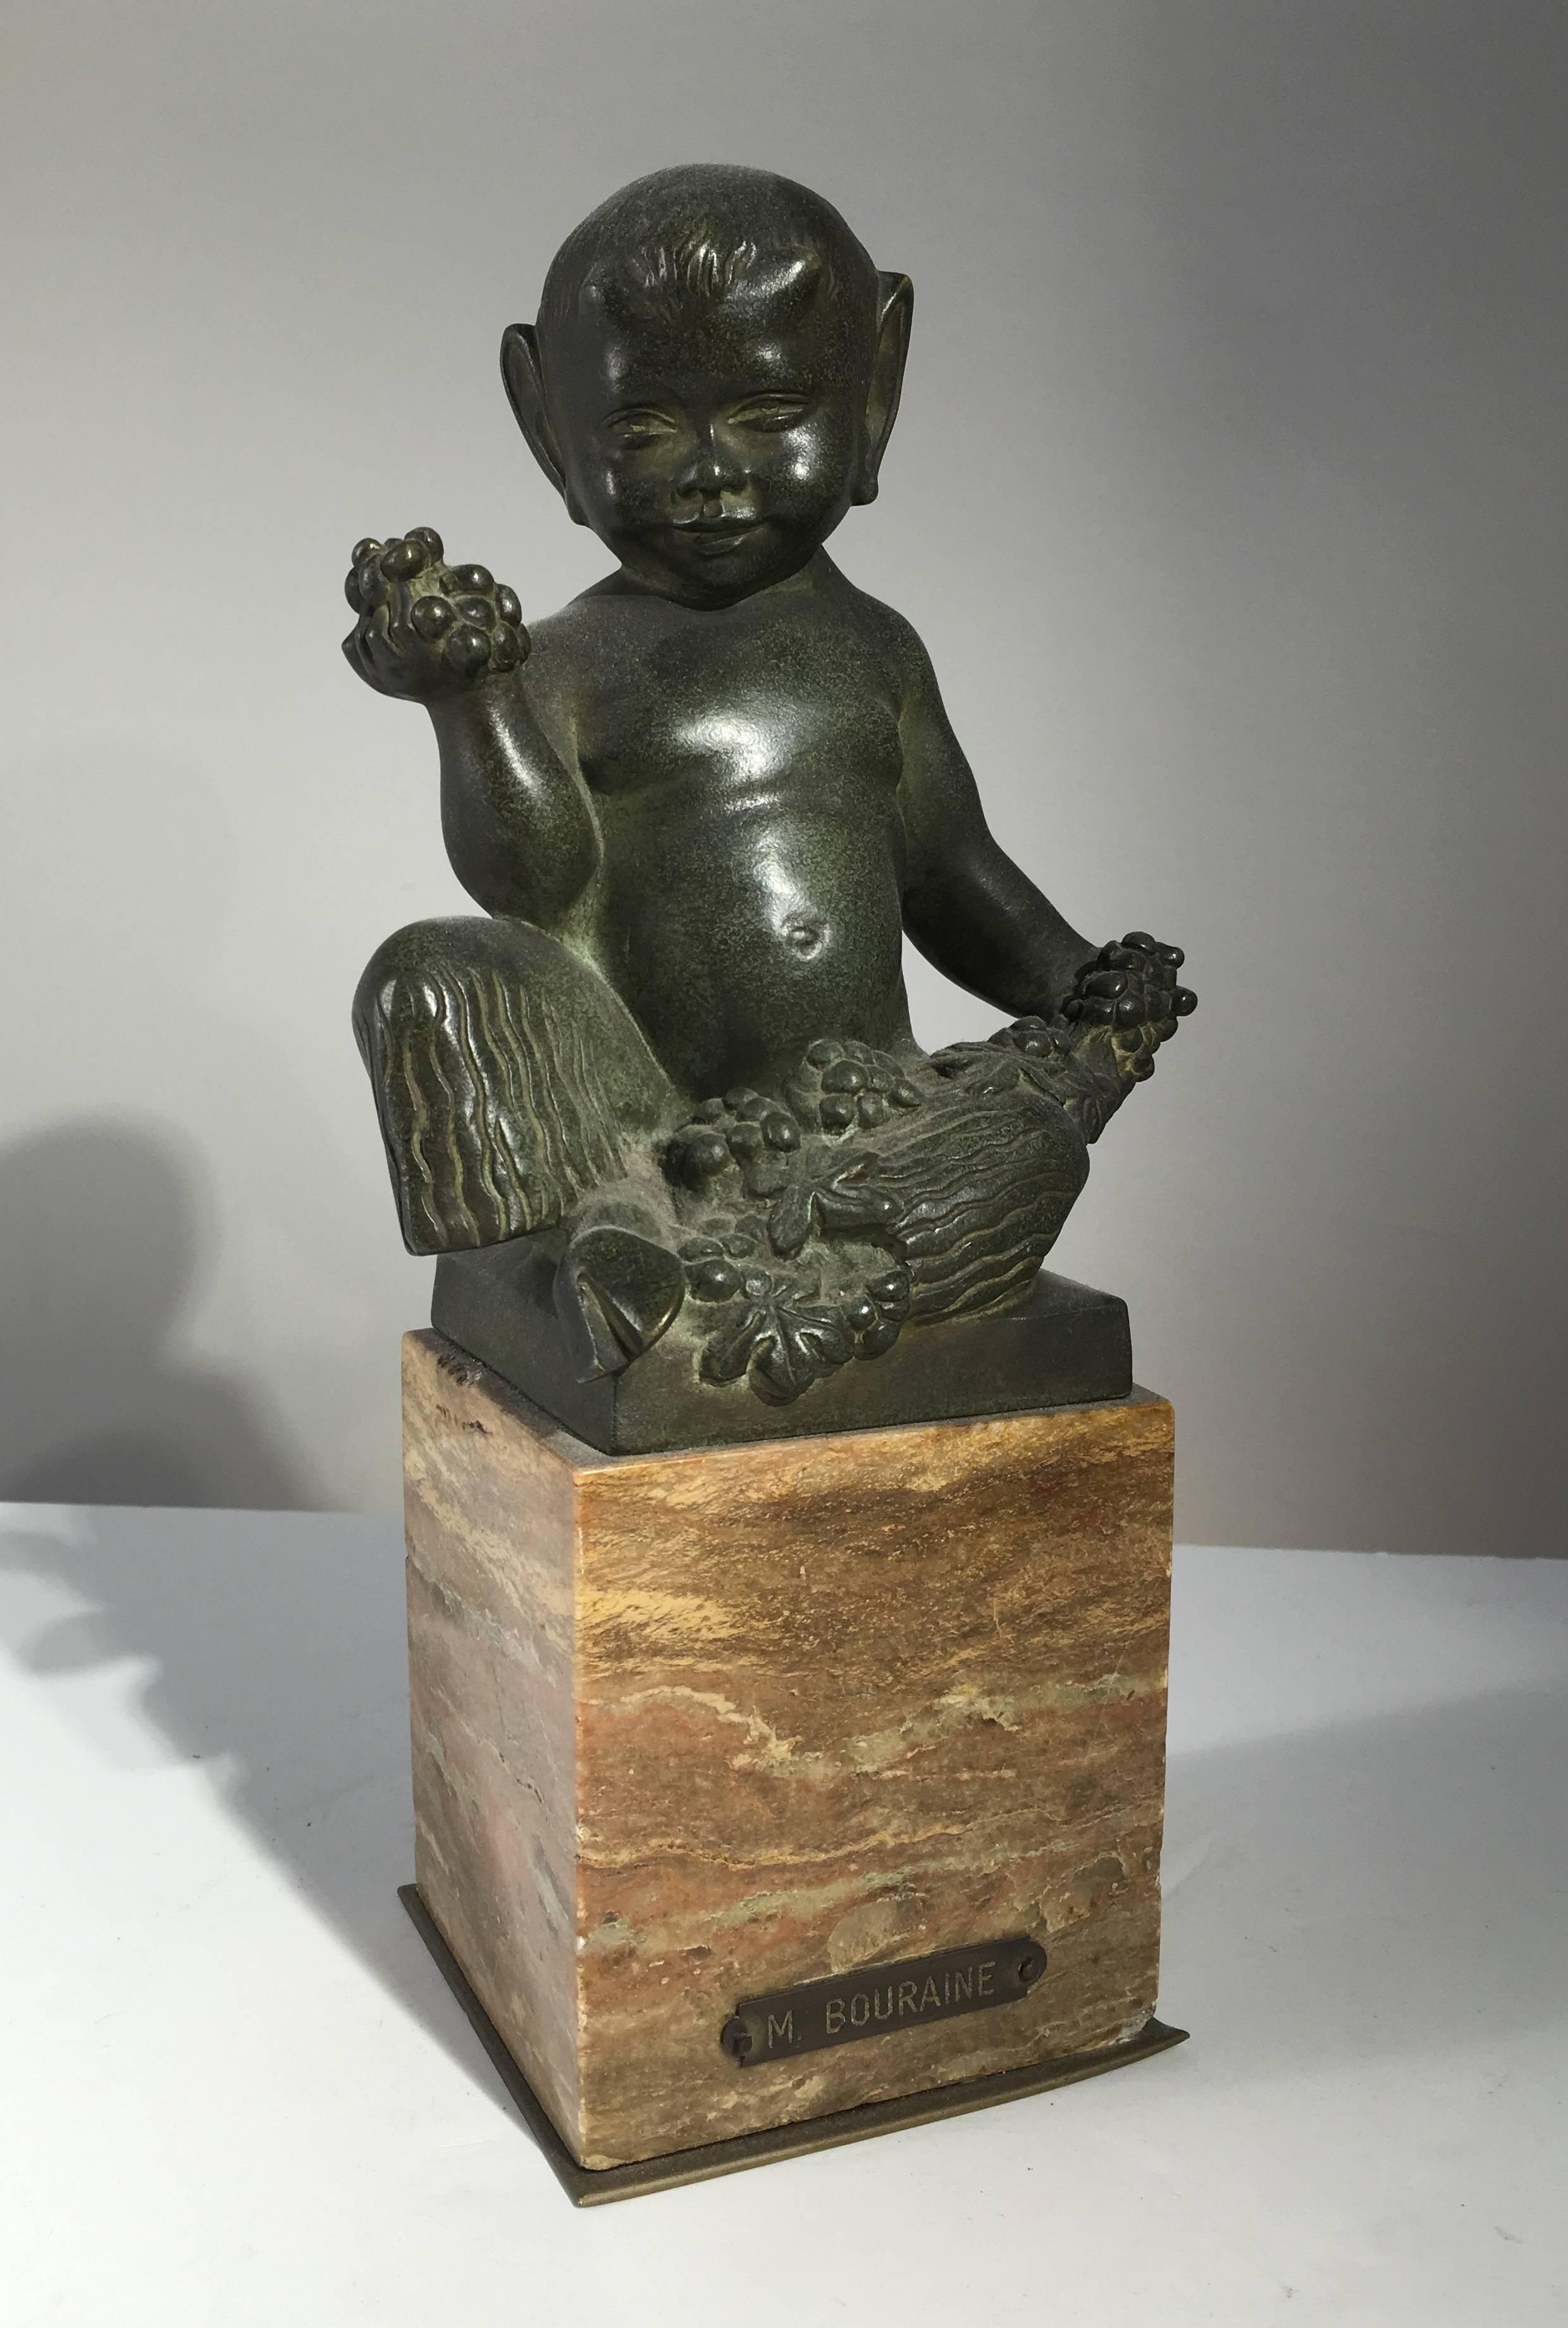 A charming bronze by Marcel Andre Bouraine, circa 1930, of a seated faun with grapes and flowers, beautiful patina and elegant marble base with brass name plaque. From the estate of Pierre Moulin, author of French Country style books and founder of